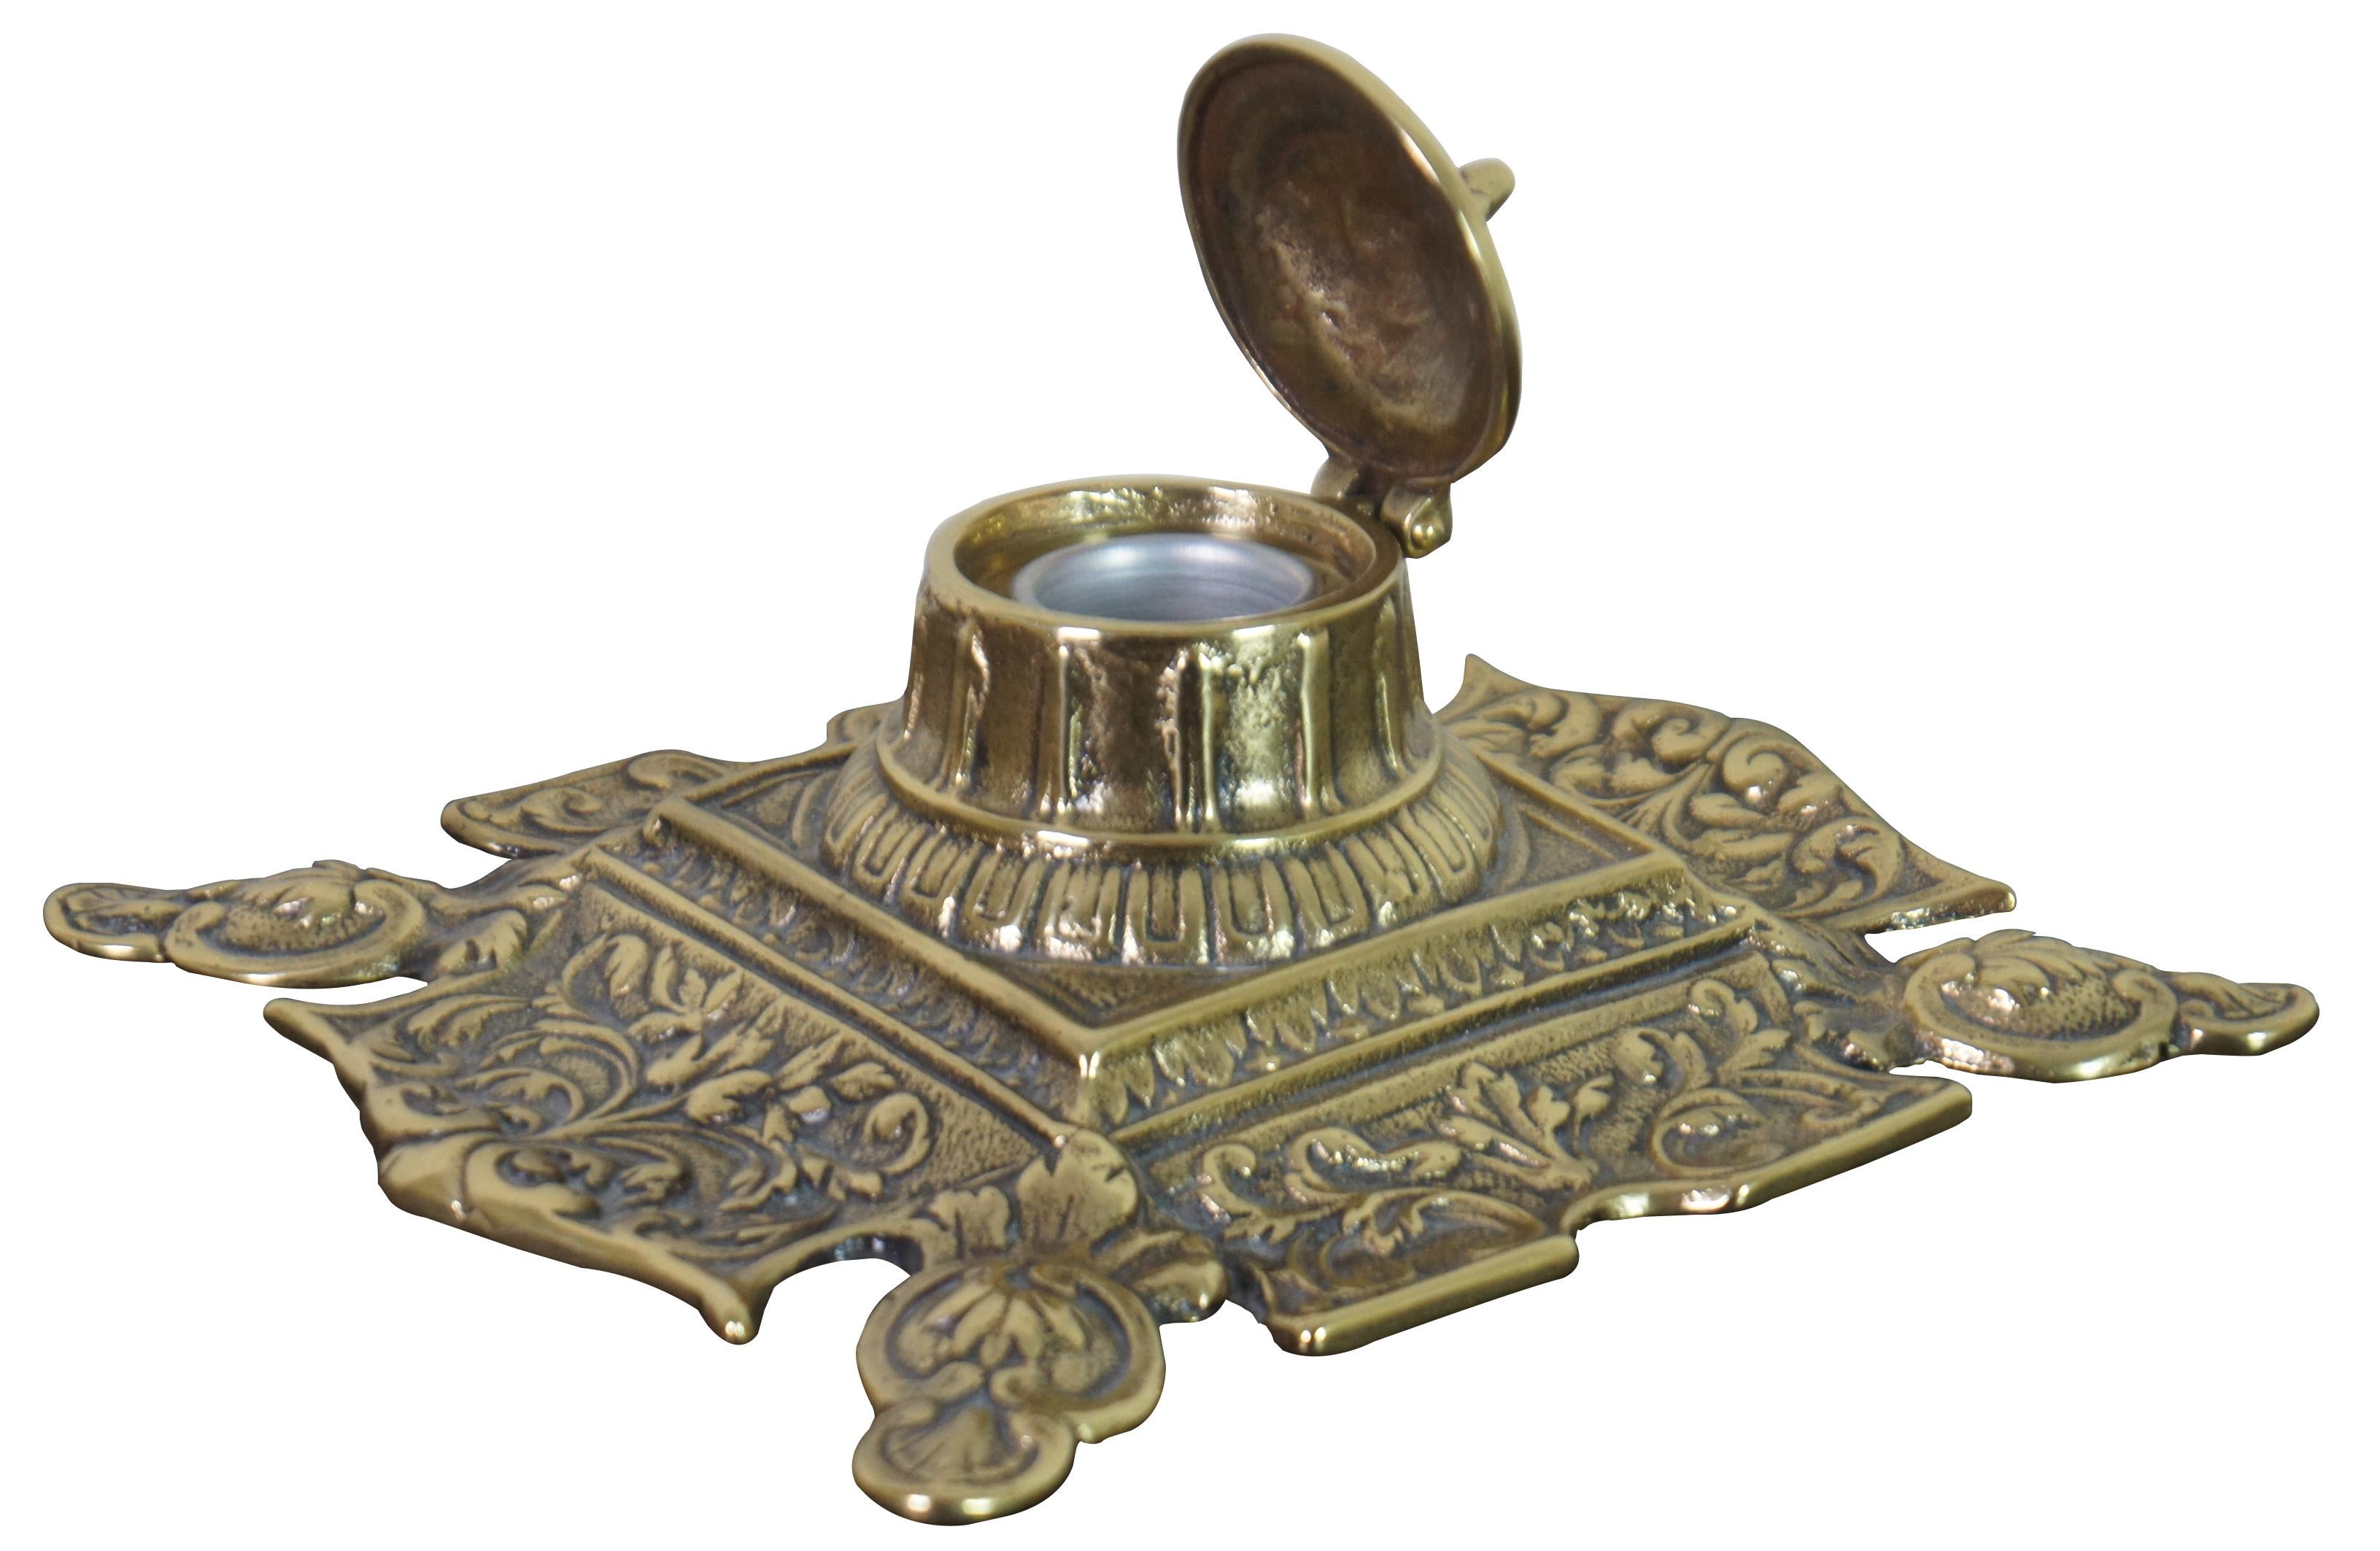 Antique Art Nouveau Scalloped Brass Desktop Executive Inkwell Stand In Good Condition For Sale In Dayton, OH